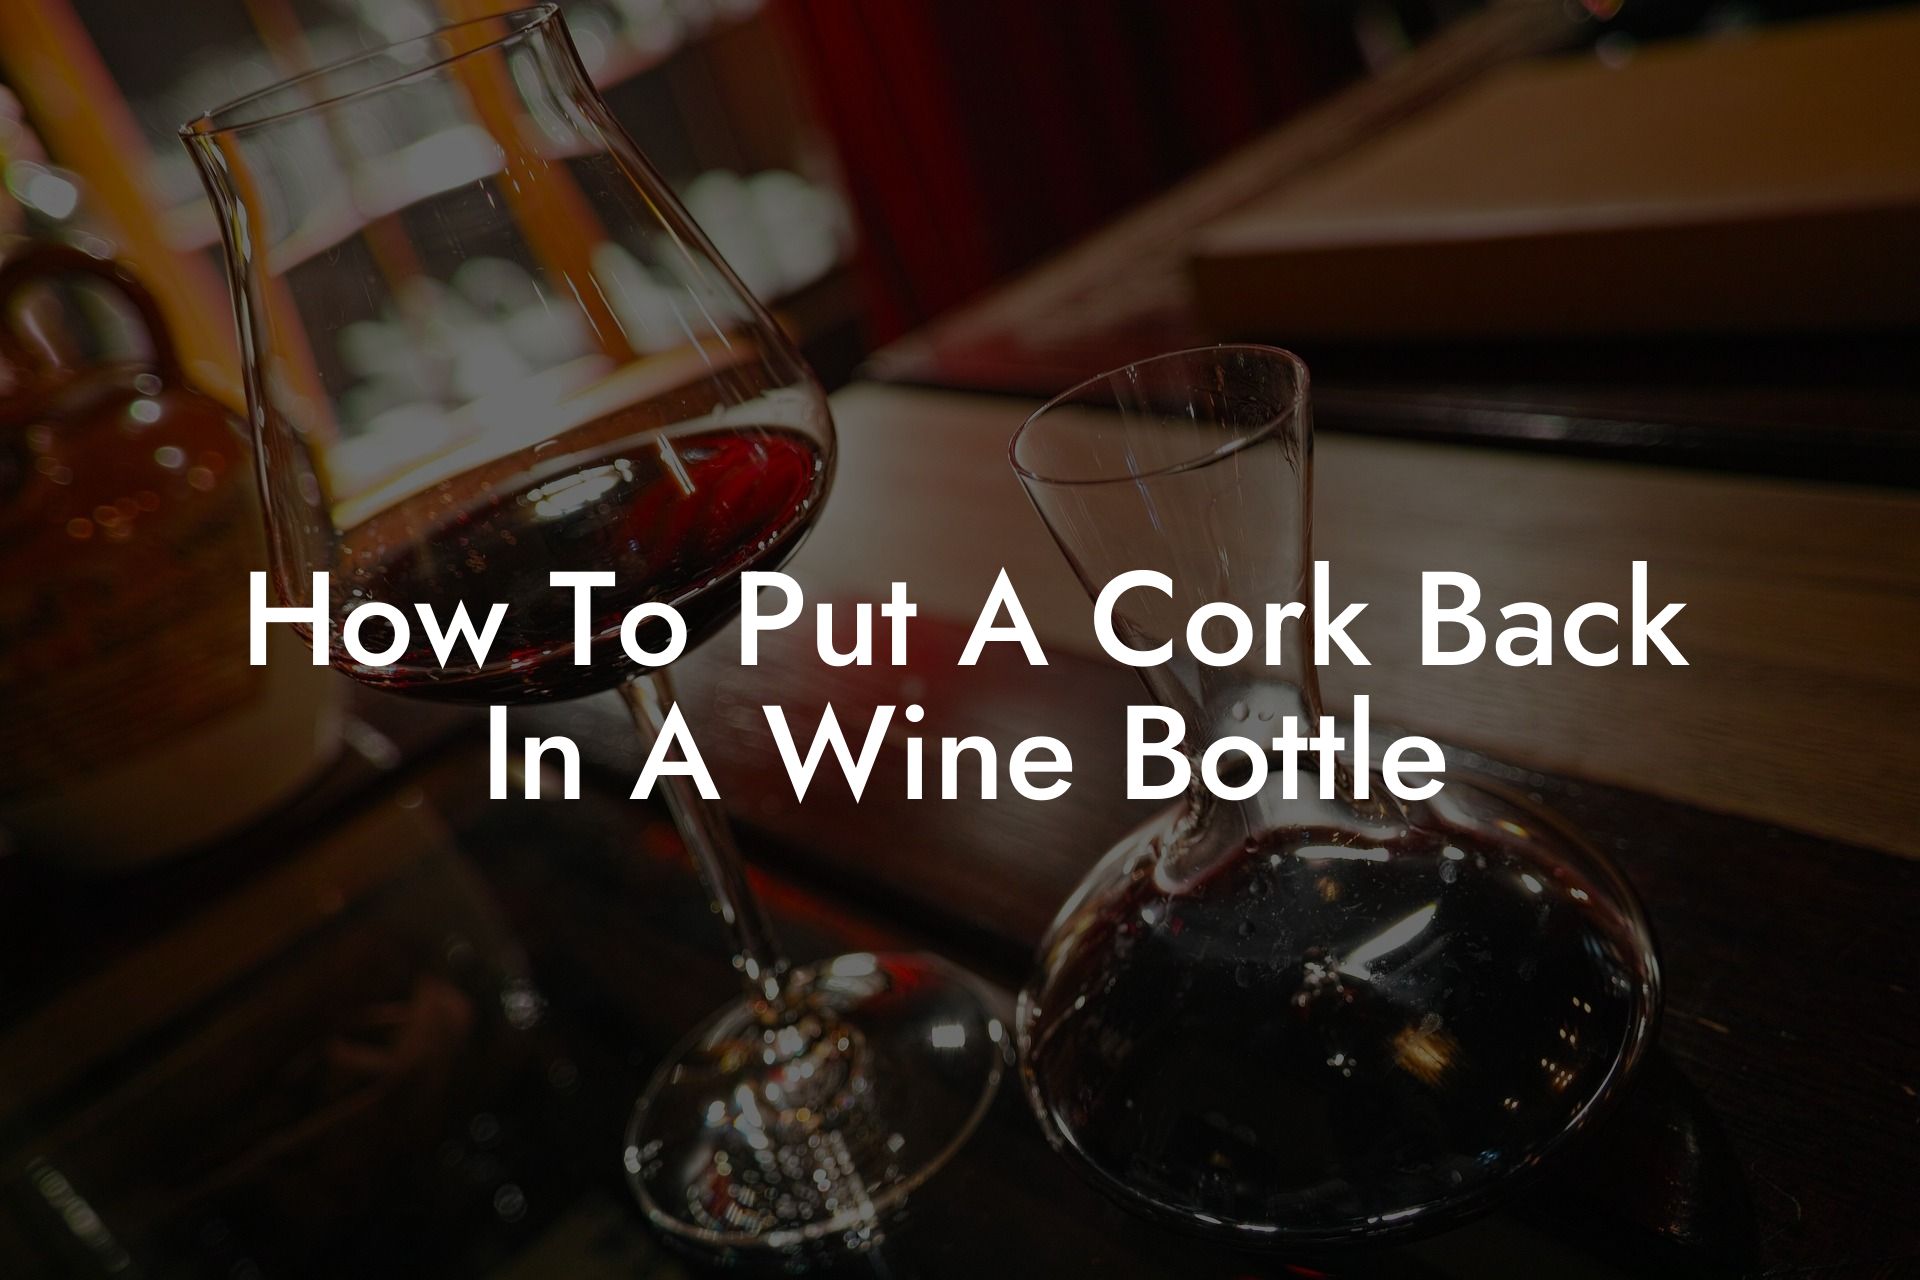 How To Put A Cork Back In A Wine Bottle